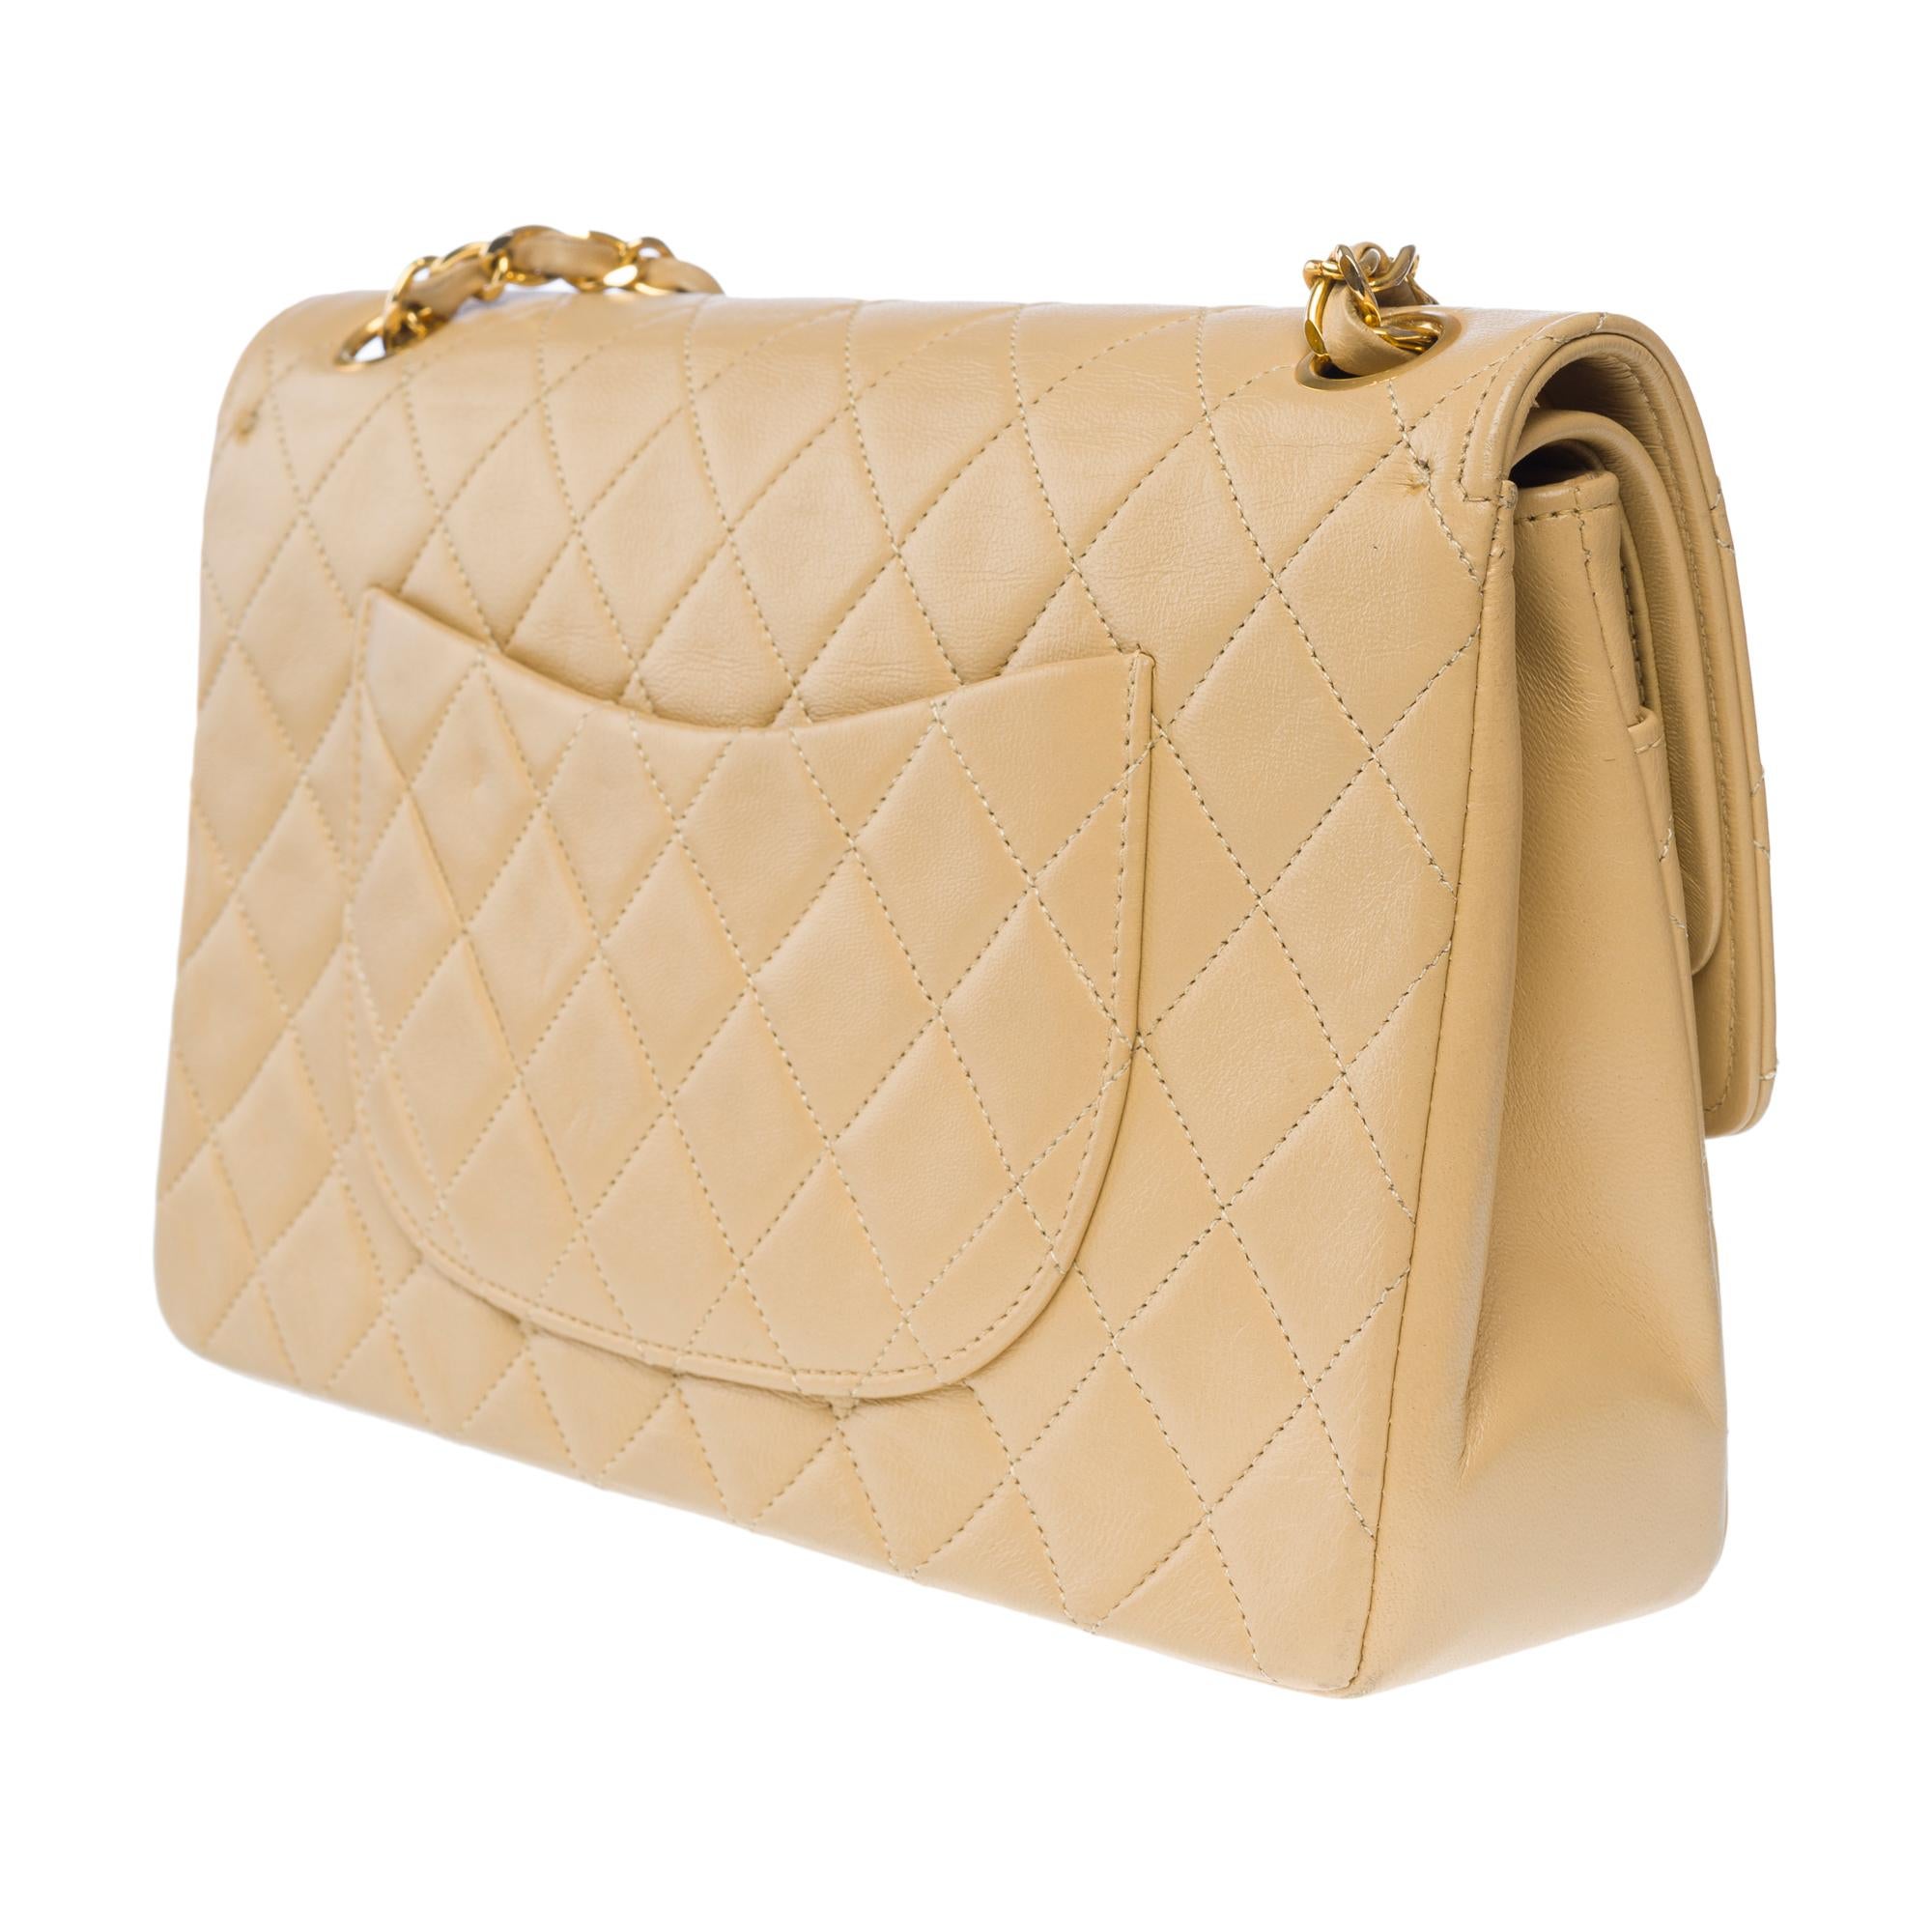 Chanel Timeless double flap shoulder bag in beige quilted lambskin leather, GHW For Sale 1